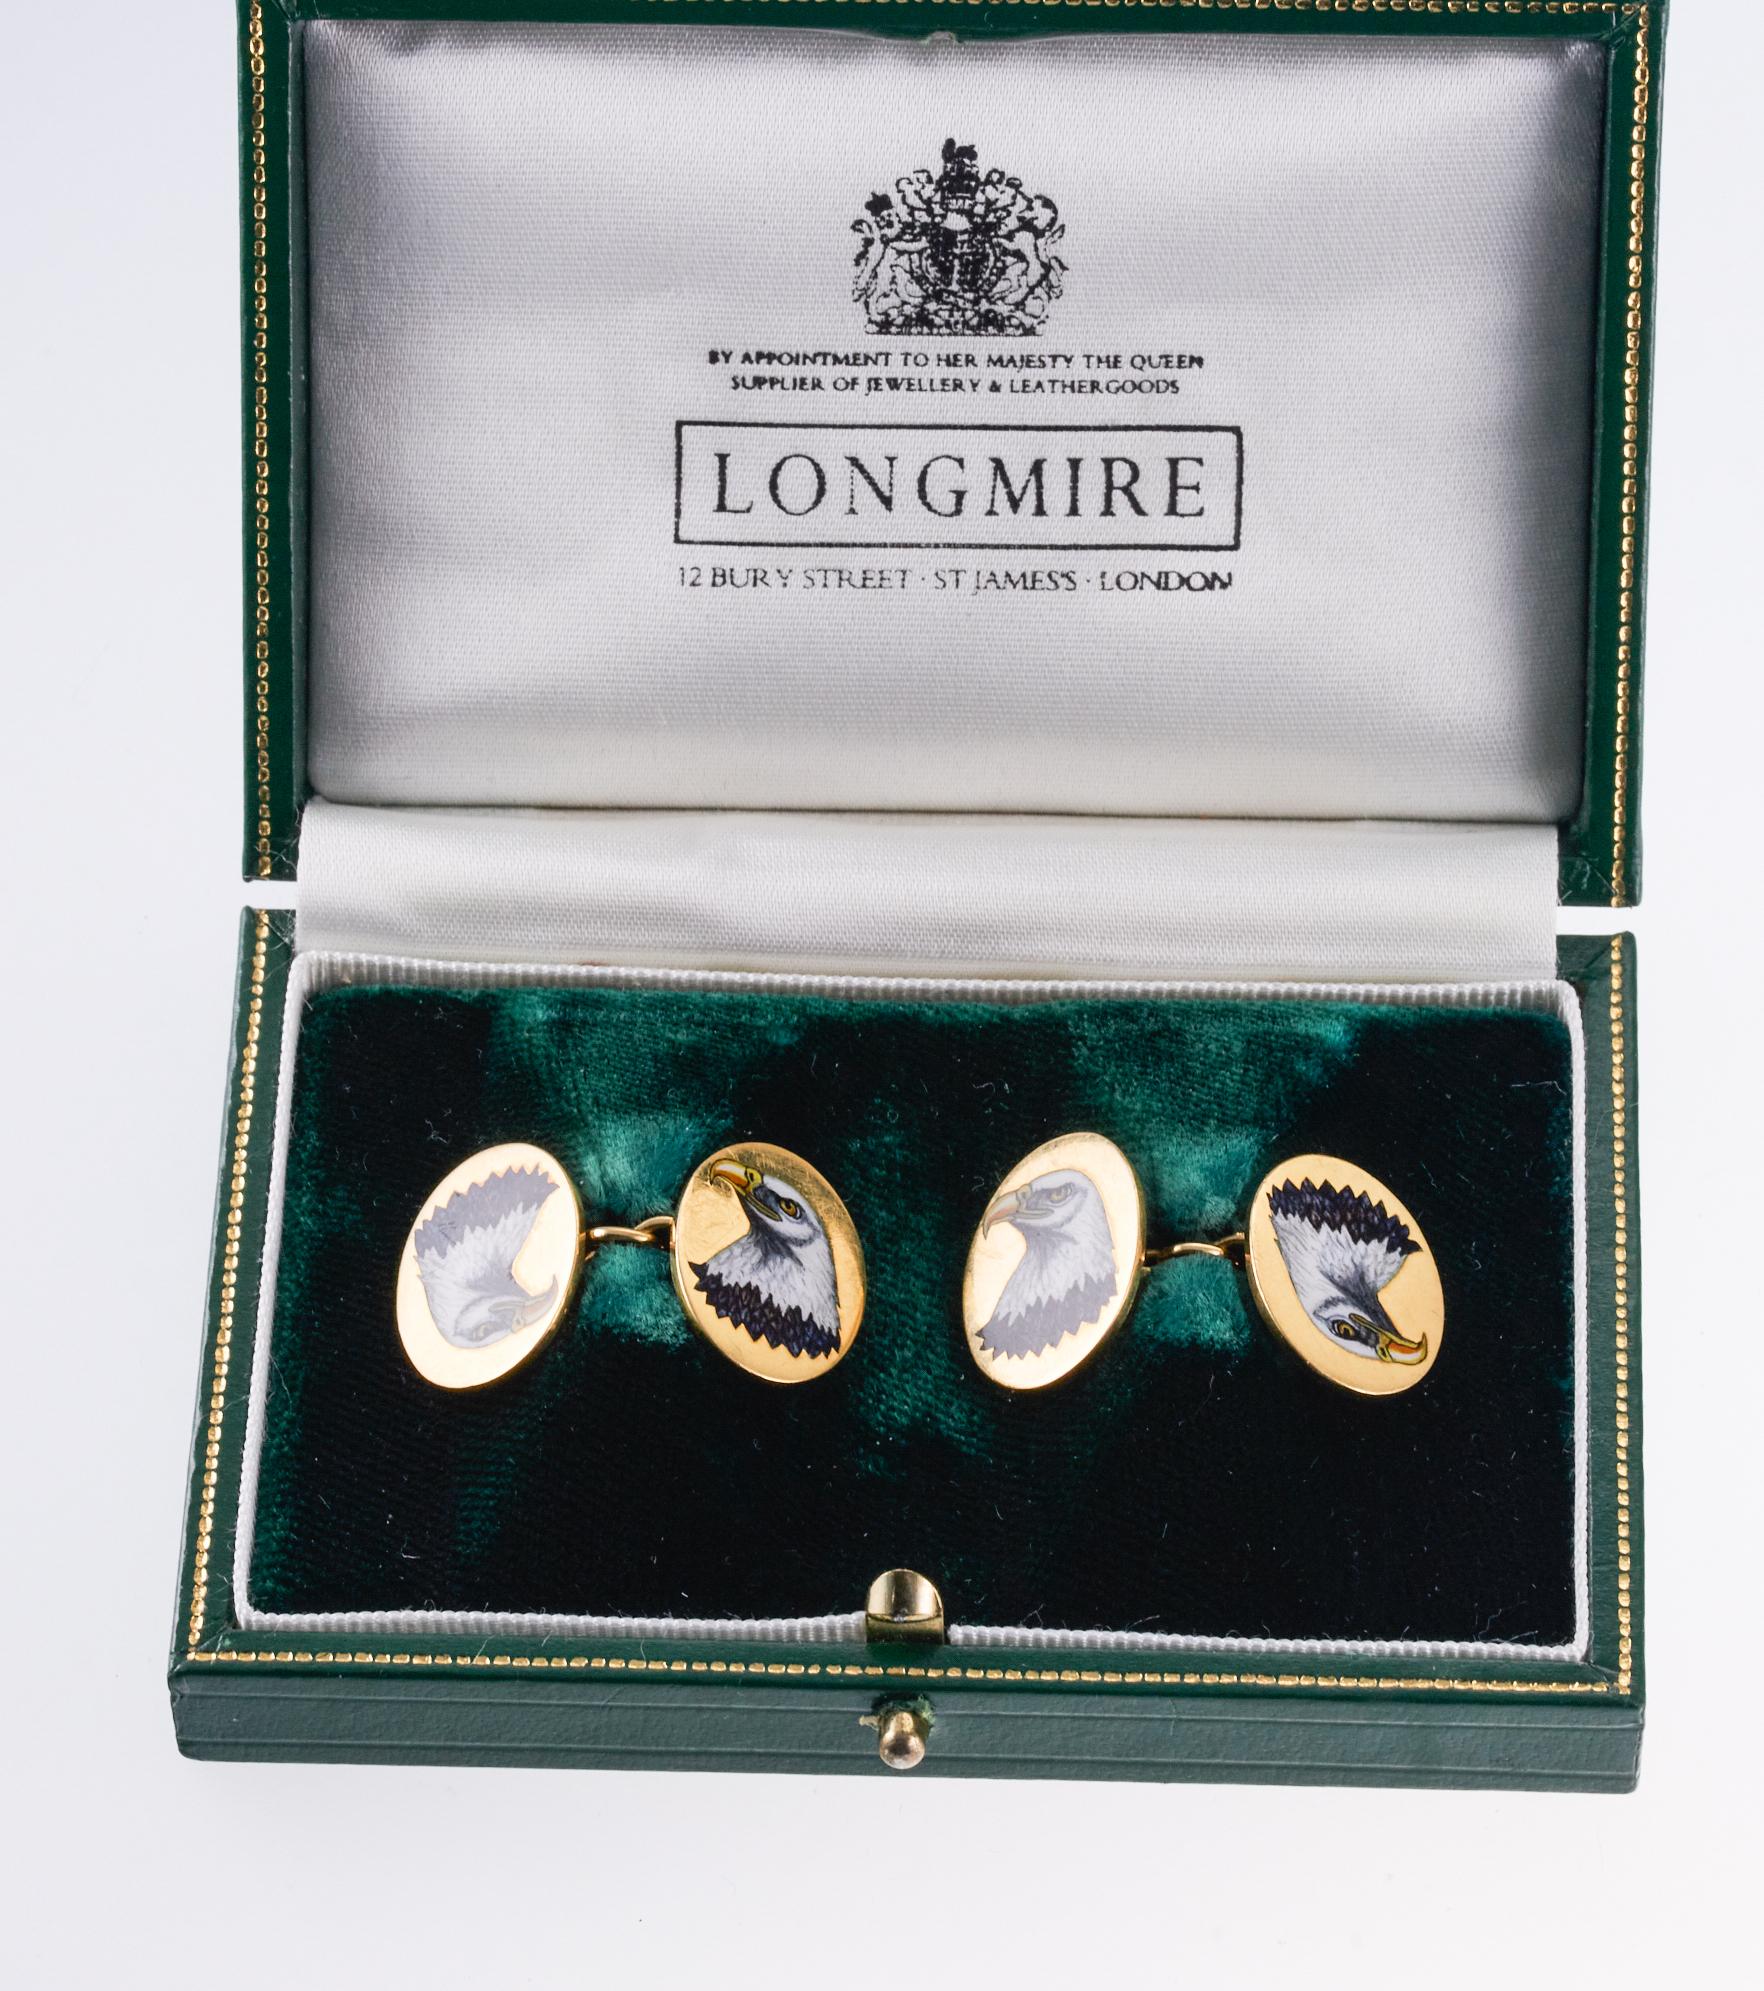 Pair of 18k gold oval cufflinks, crafted by Longmire of London, featuring enamel eagle chest on each. Top measures 19mm x 15mm. Set comes in original fitted box. Marked Longmire, PL, English marks. Weight of the pair - 15.6 grams. 